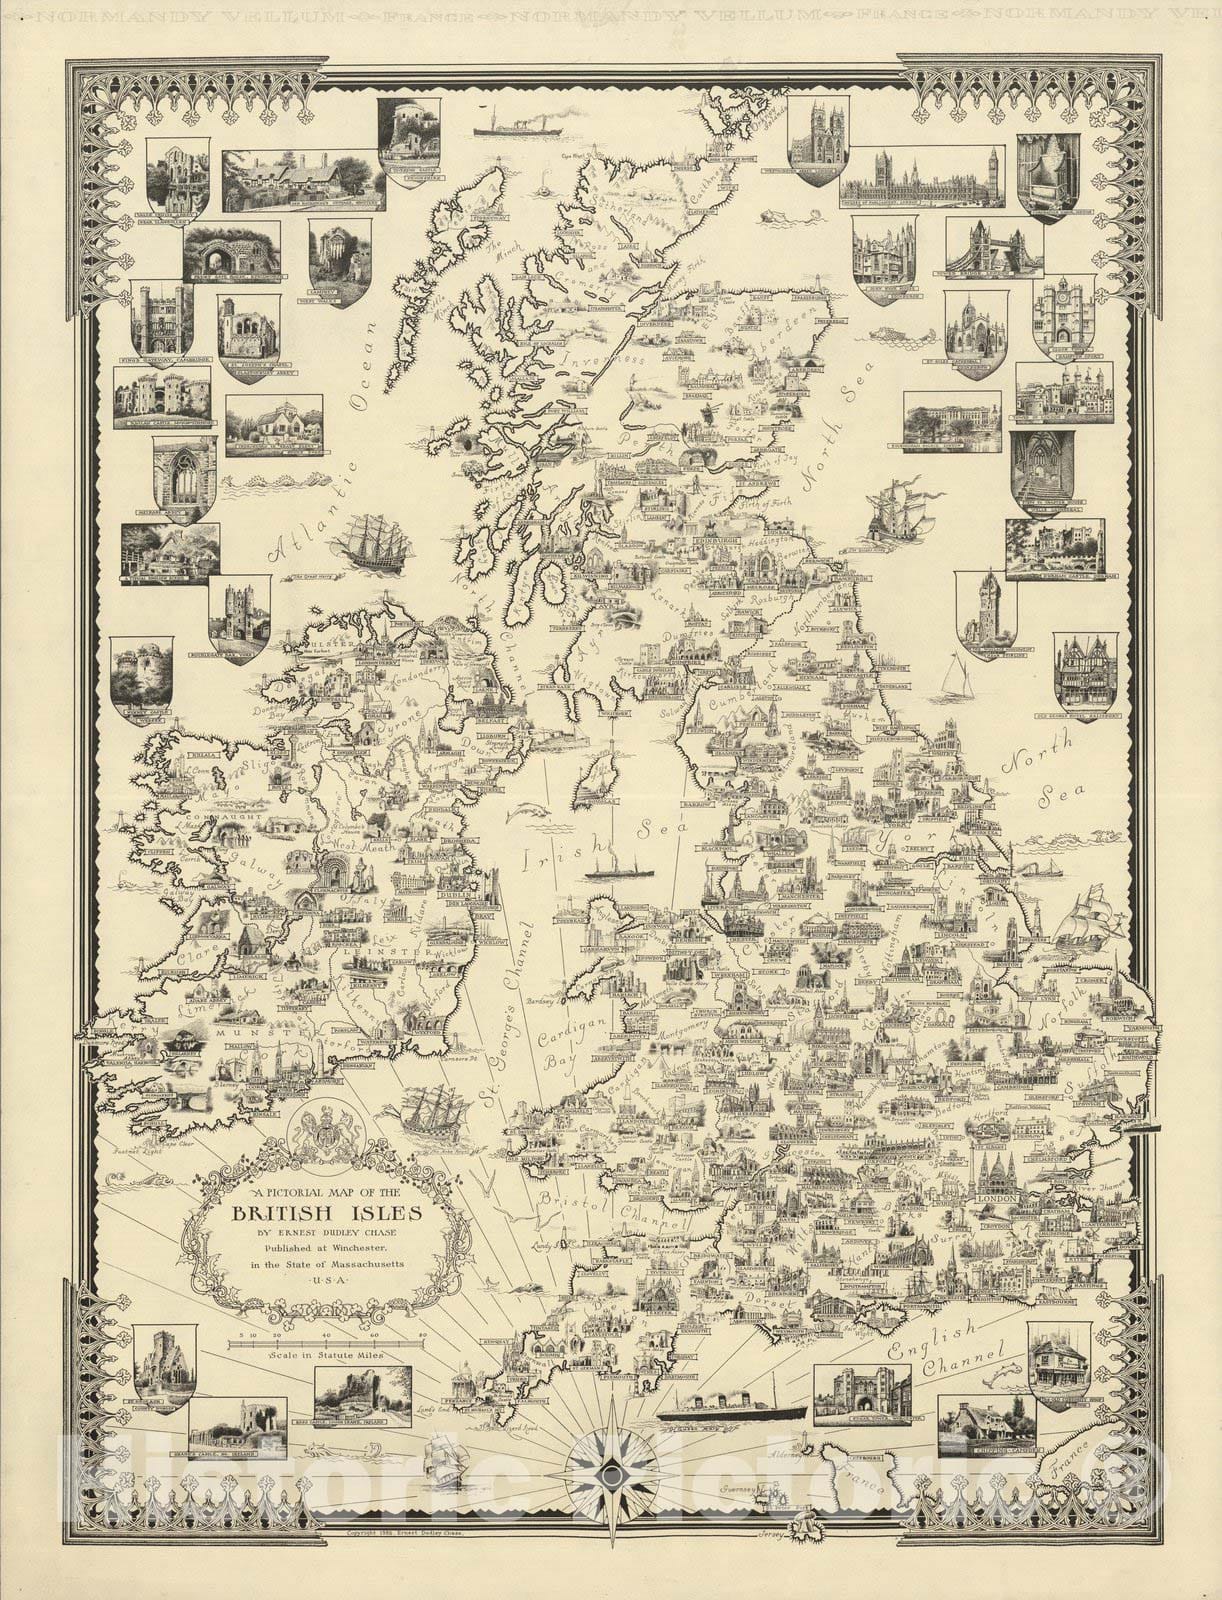 Historic Map : A pictorial map of the British Isles, 1935 - Vintage Wall Art